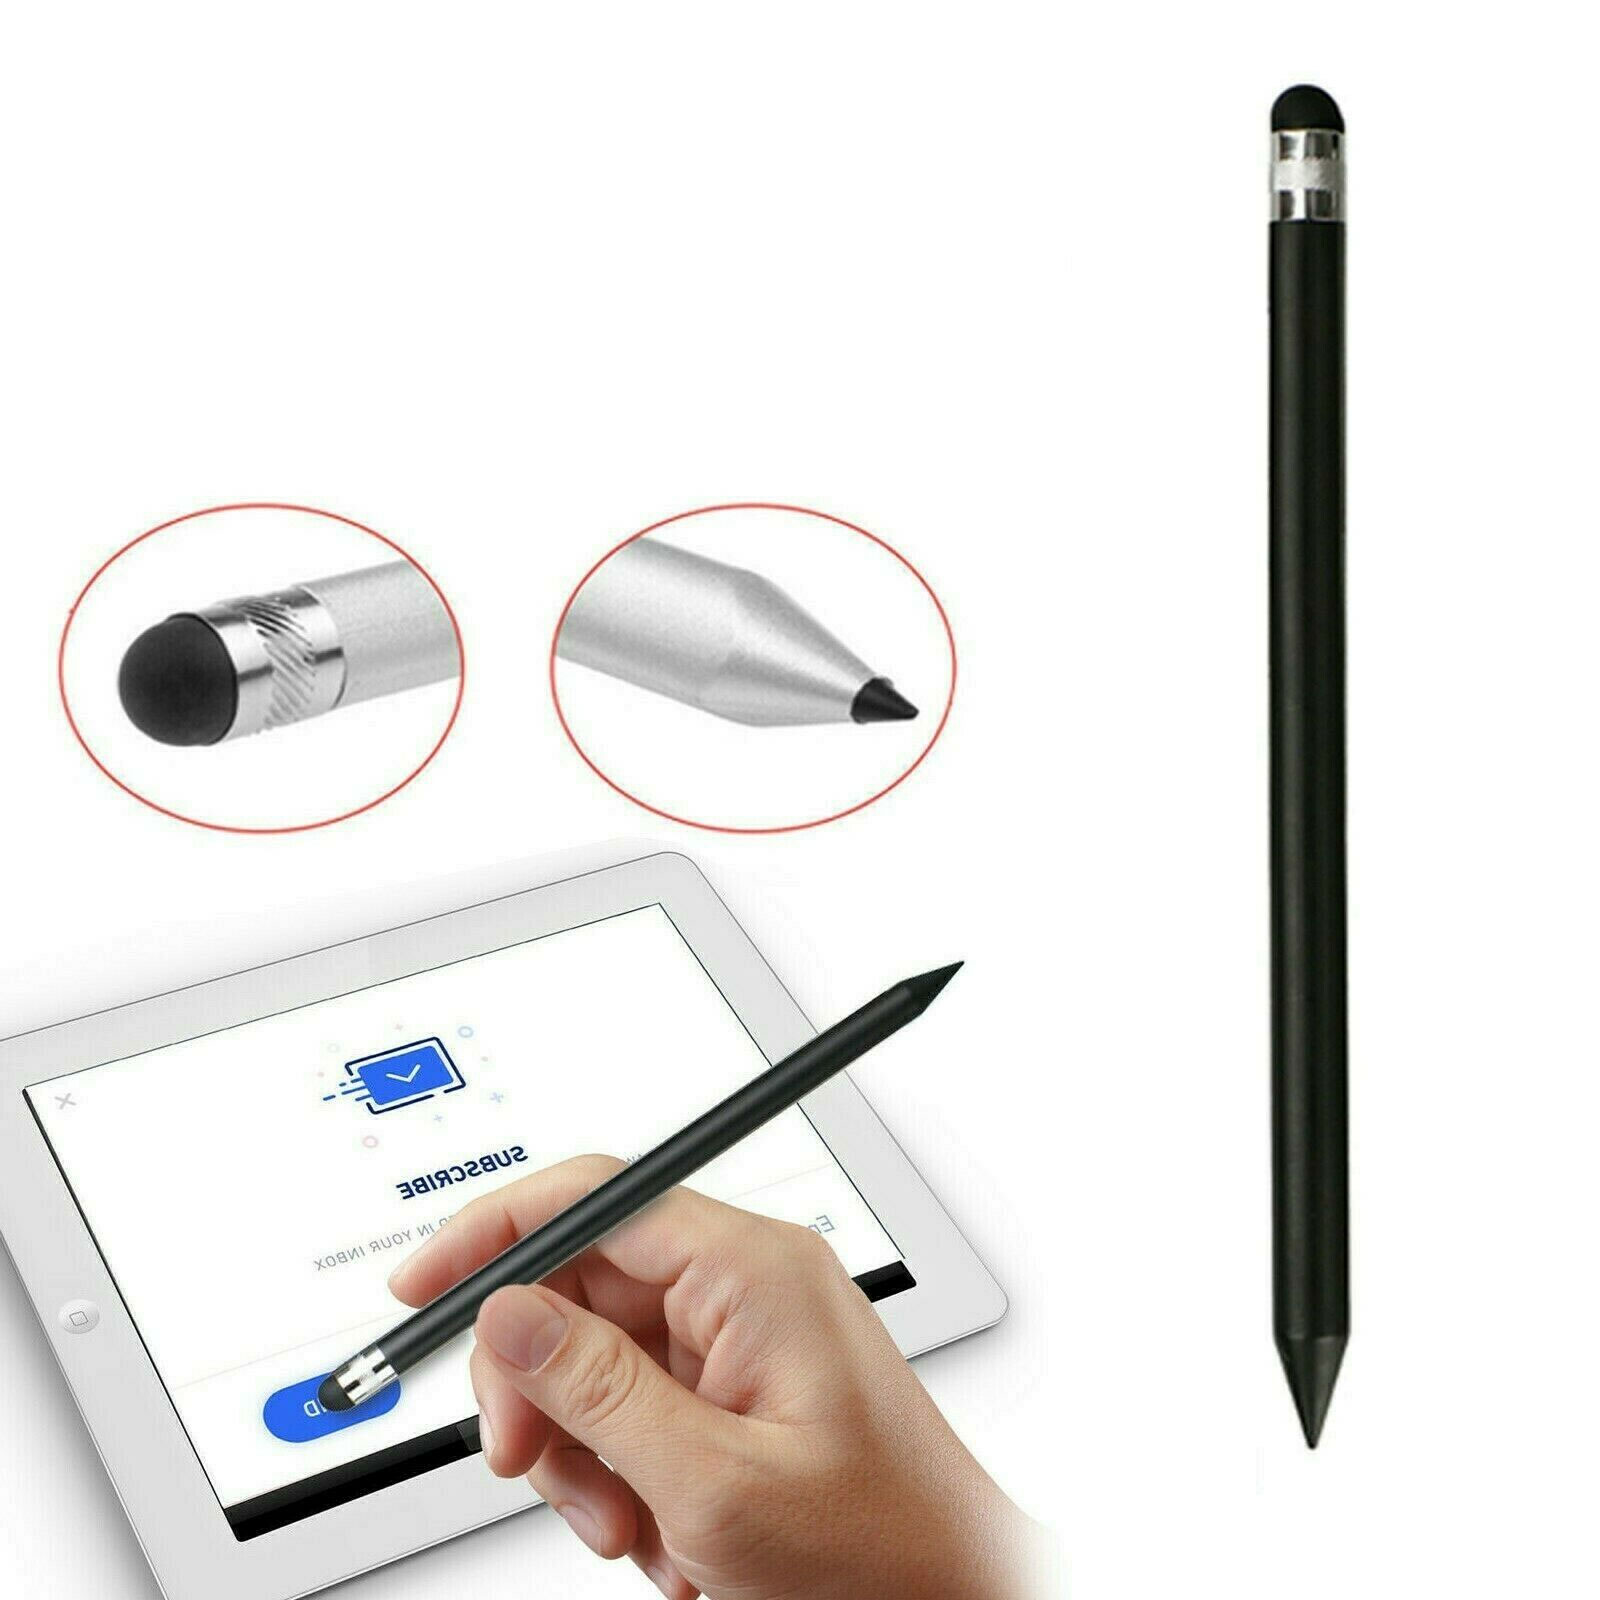 5x Argento Universale Cellulare Tablet Pen Stylus Touch Display einhabe PENNA MOLLA 